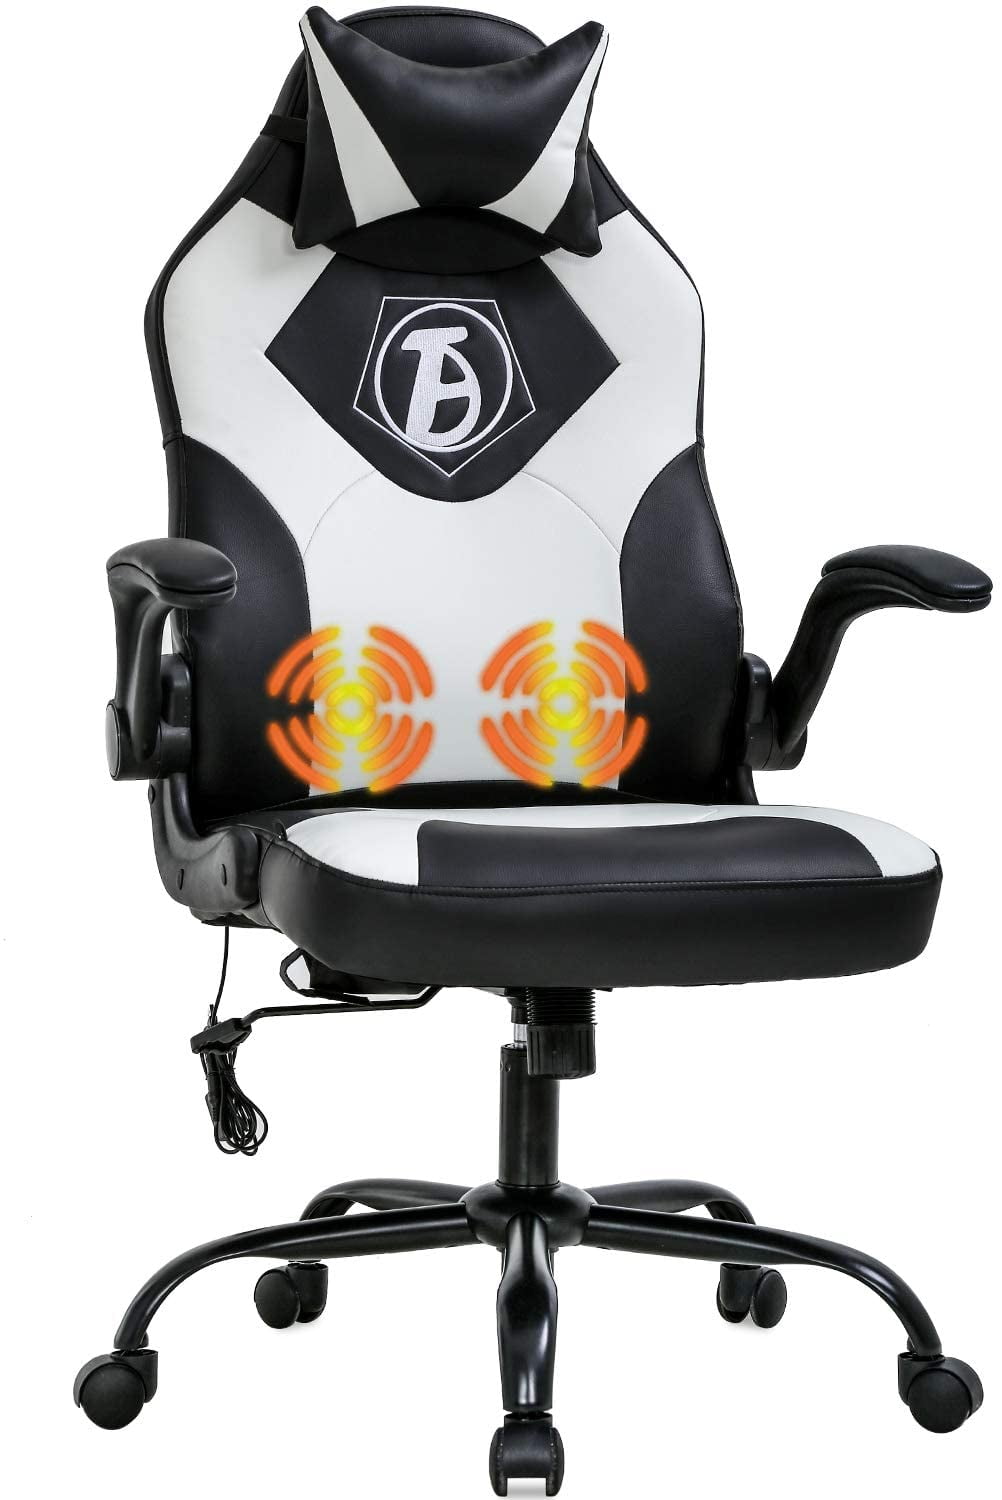 Black Cloud Mountain Office Executive Chair Desk Chairs Computer Chair PU Leather High Back Tall Chair for Office Ergonomic Racing Gaming Swivel Adjustable Chair 